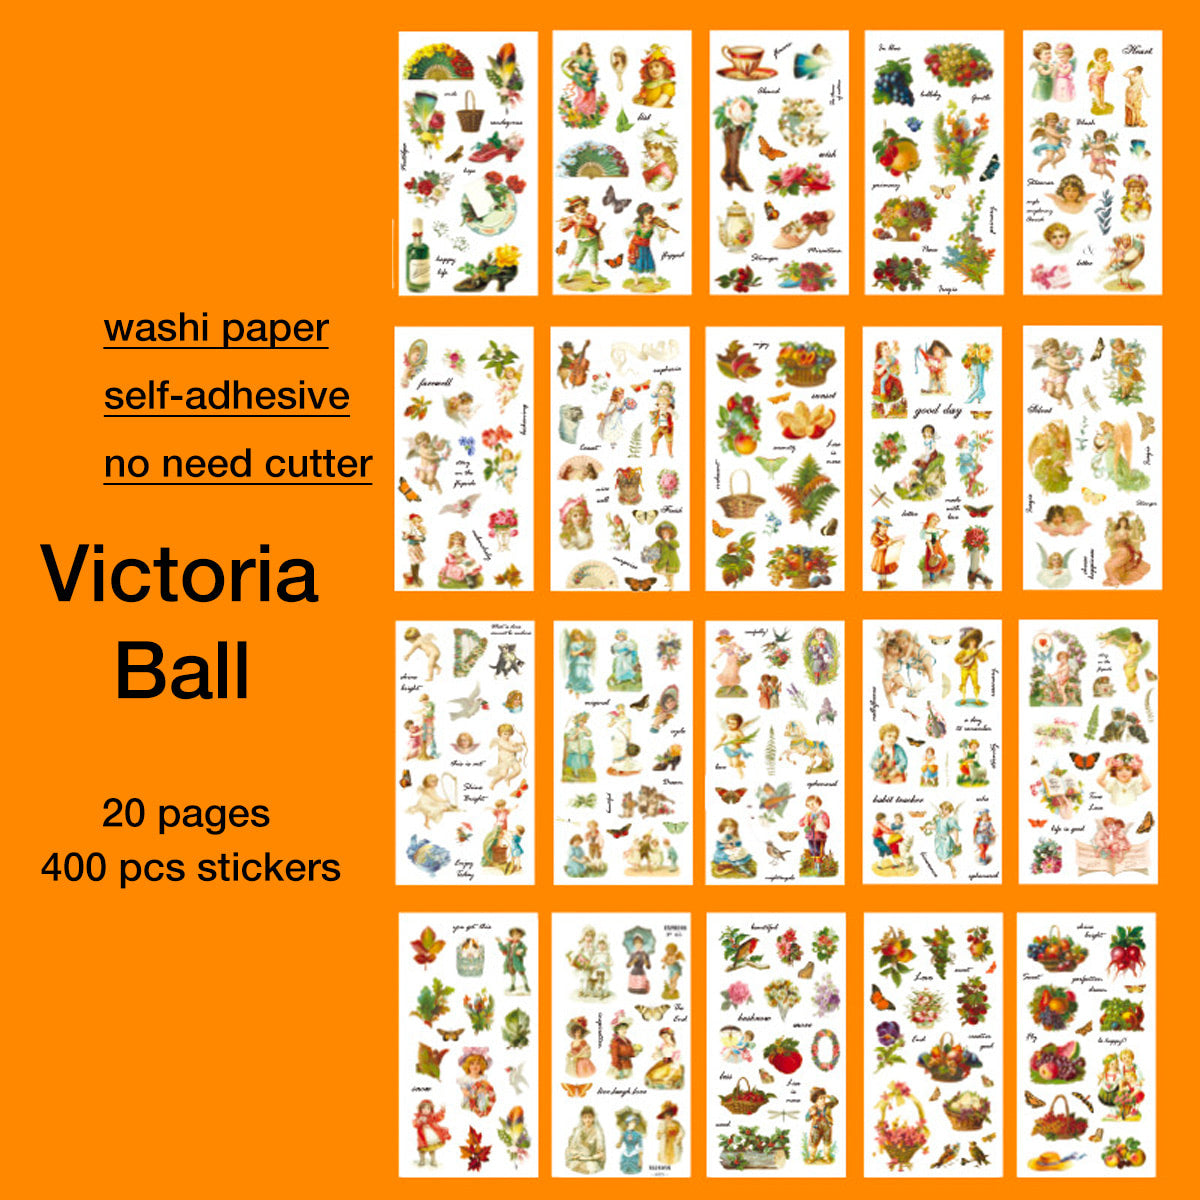 20 Pages Past Year Vintage Precut Stickers Book